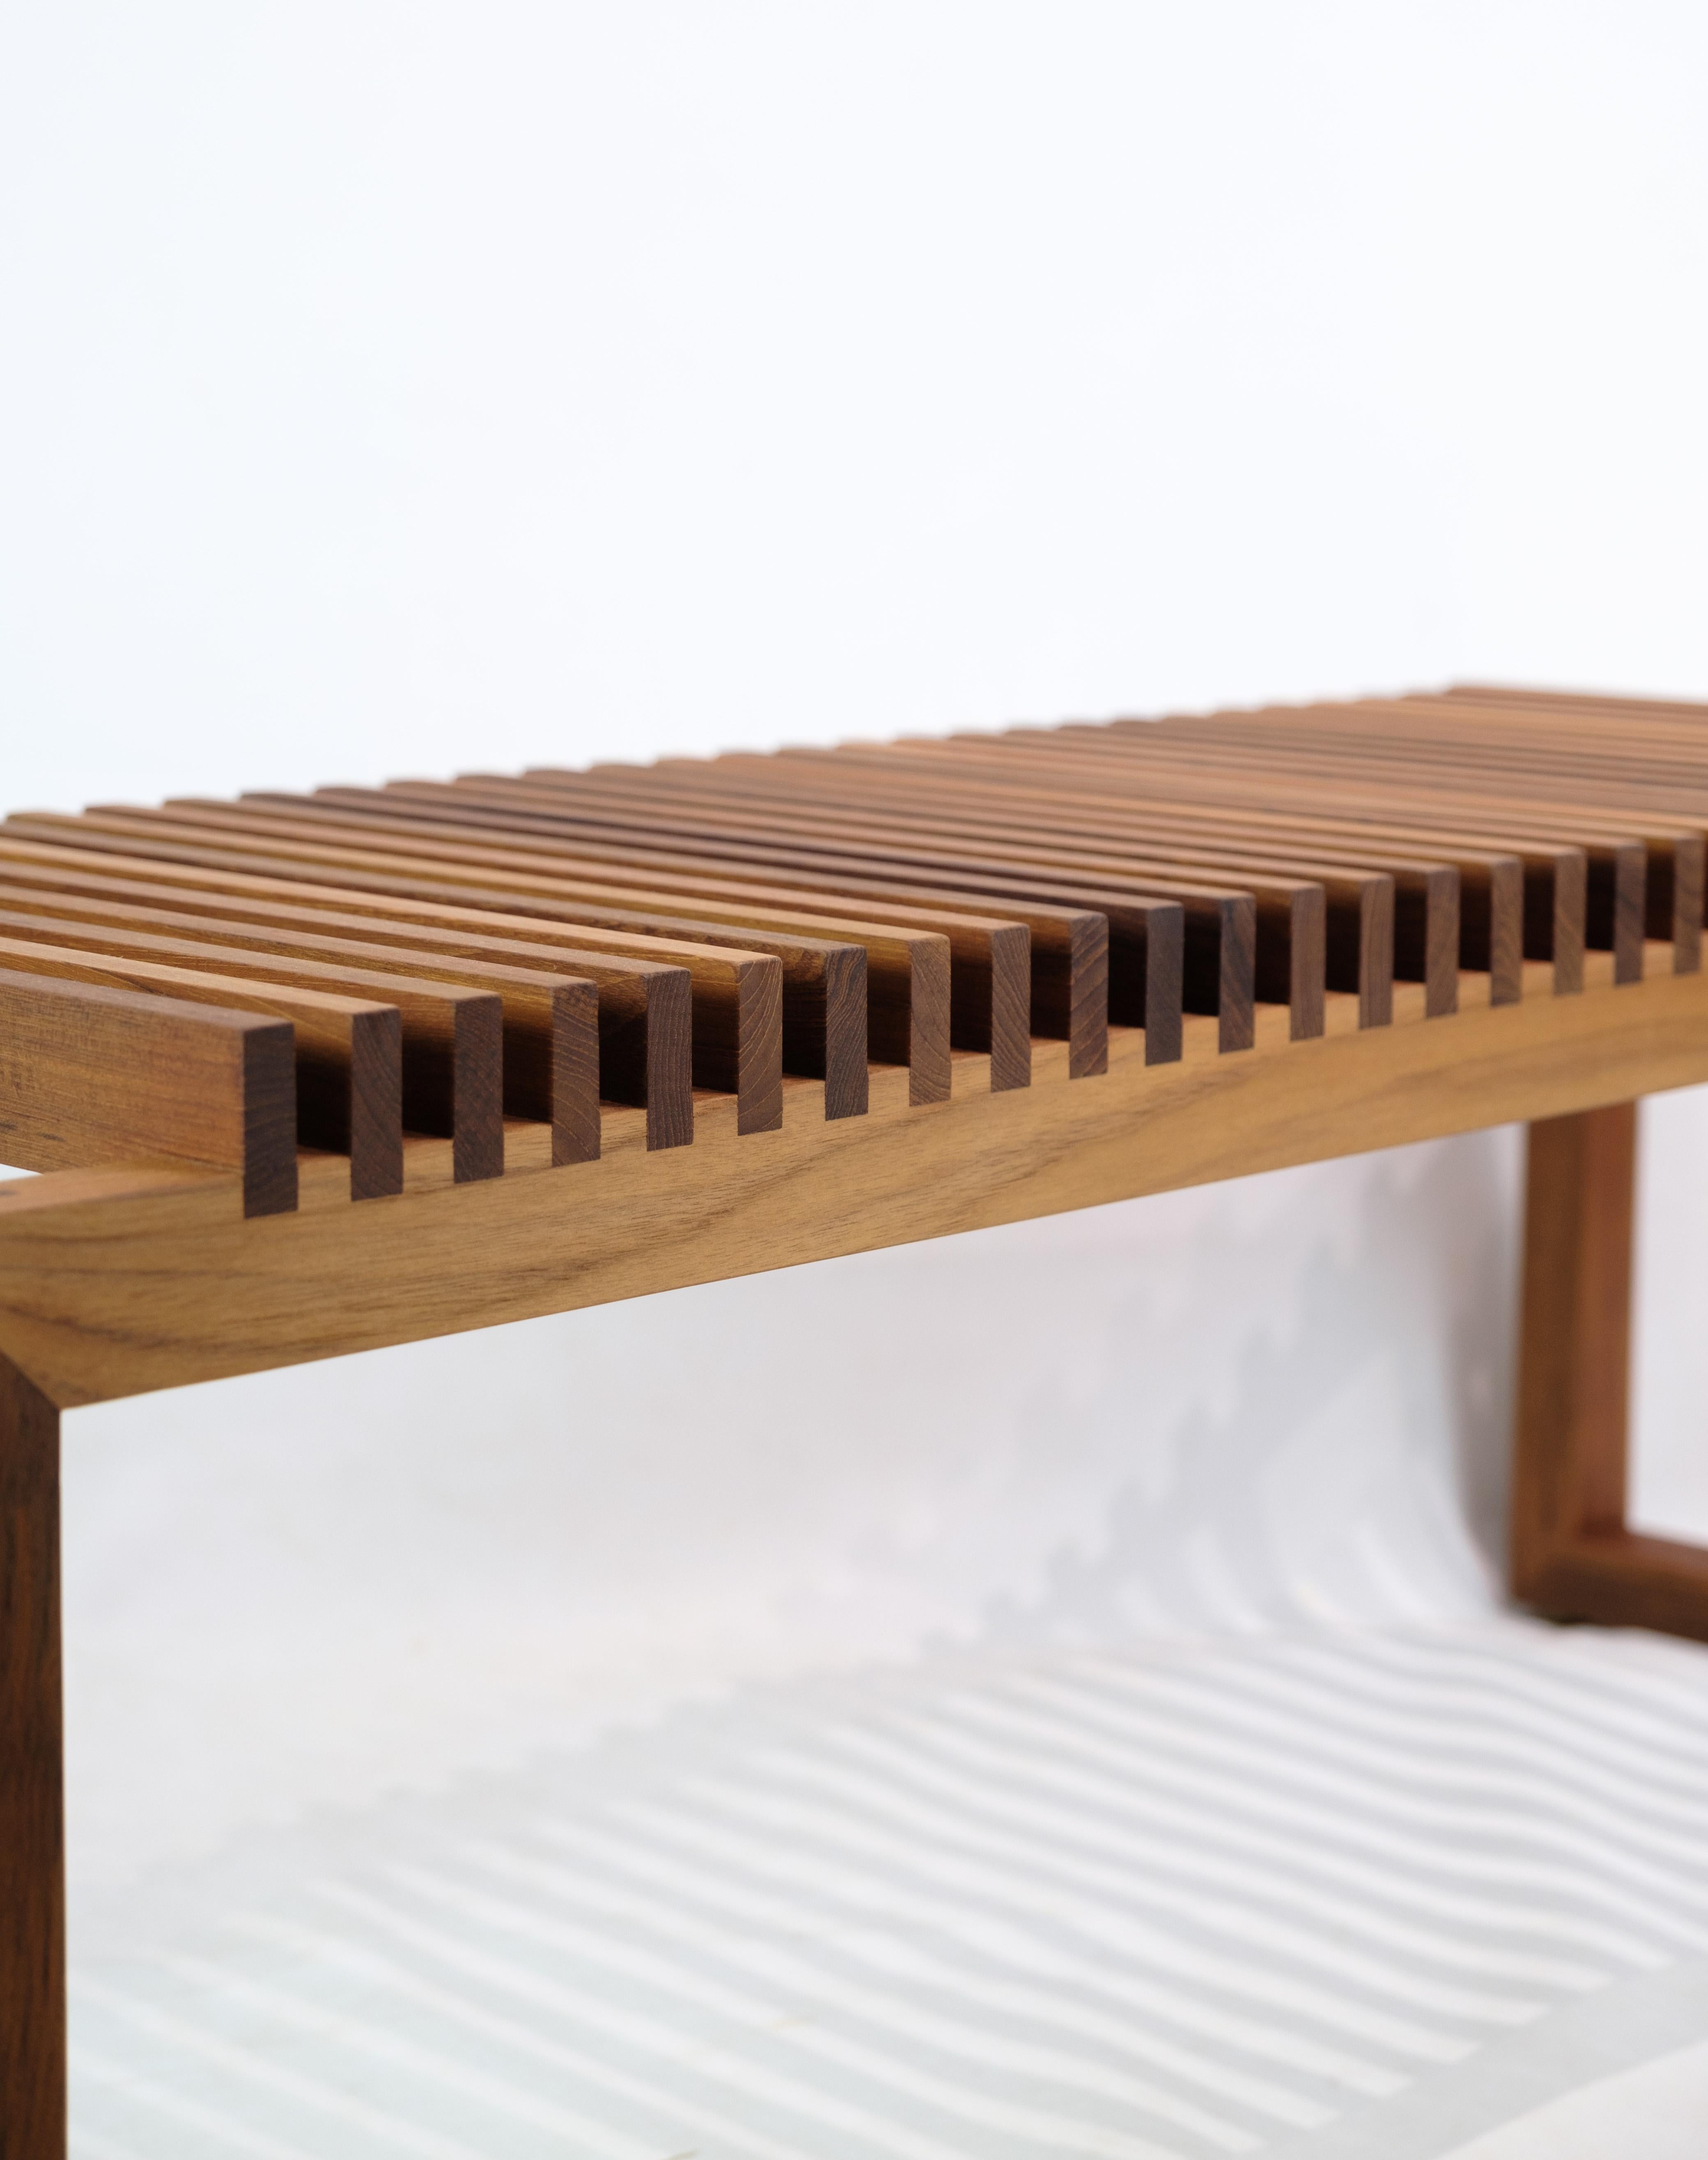 Cutter Bench designed by Niels Hvass in teak wood. A minimalist design makes the Cutter bench a beautiful exponent of the classic Scandinavian design tradition.
H: 43 W: 121 D: 40